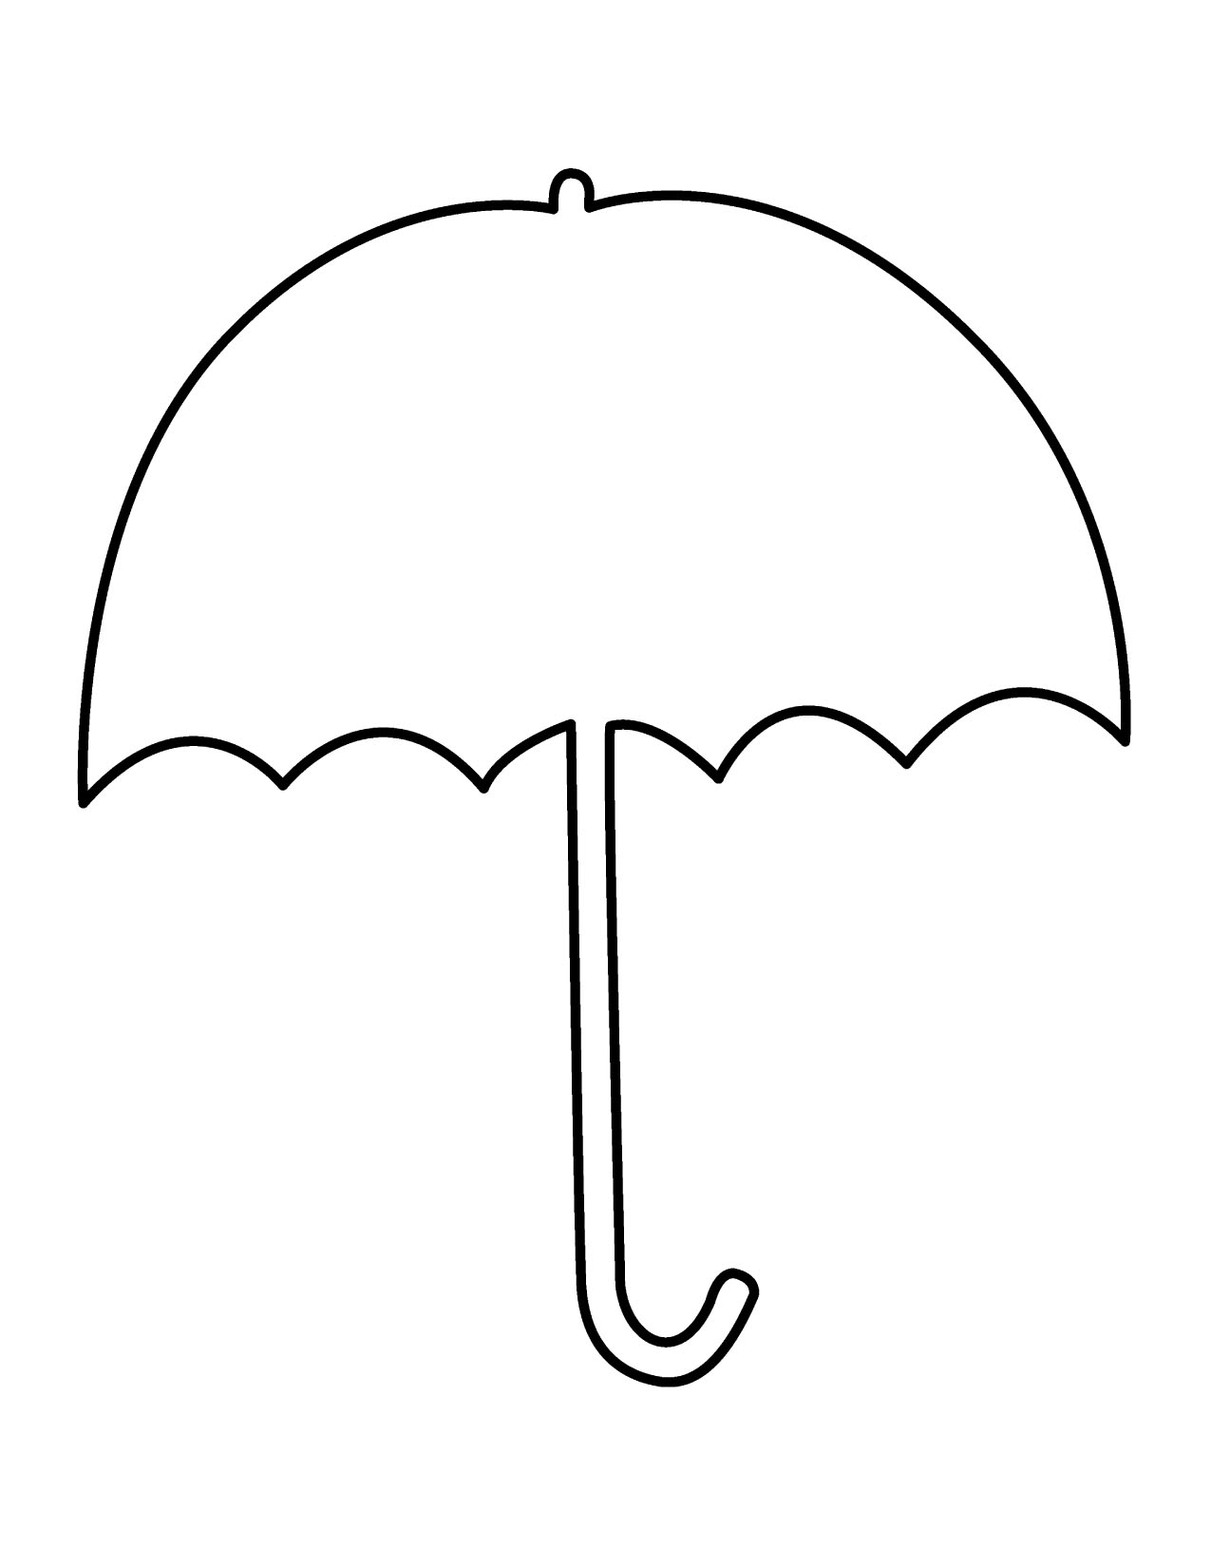 Umbrella Colouring Page Clipart - Free to use Clip Art Resource